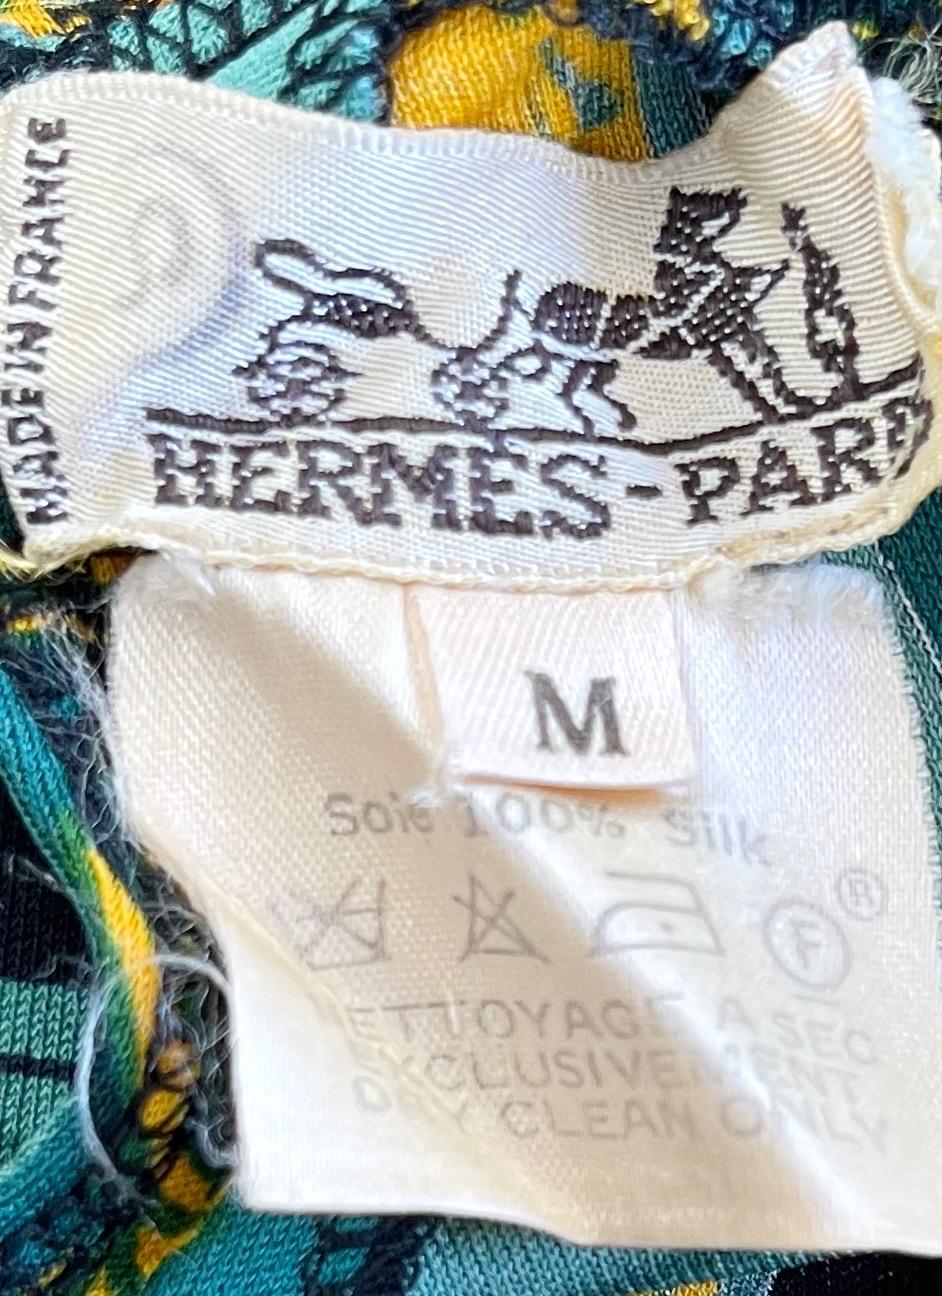 Rare and collectible vintage F/W 96 HERMÈS silk jersey bodysuit ! Artist Hugo Grygkar designed this print, naming it “Biblotheque” 
Vibrant hues of green, with exciting book prints throughout. Gold logo button at back center neck.
Great with jeans,